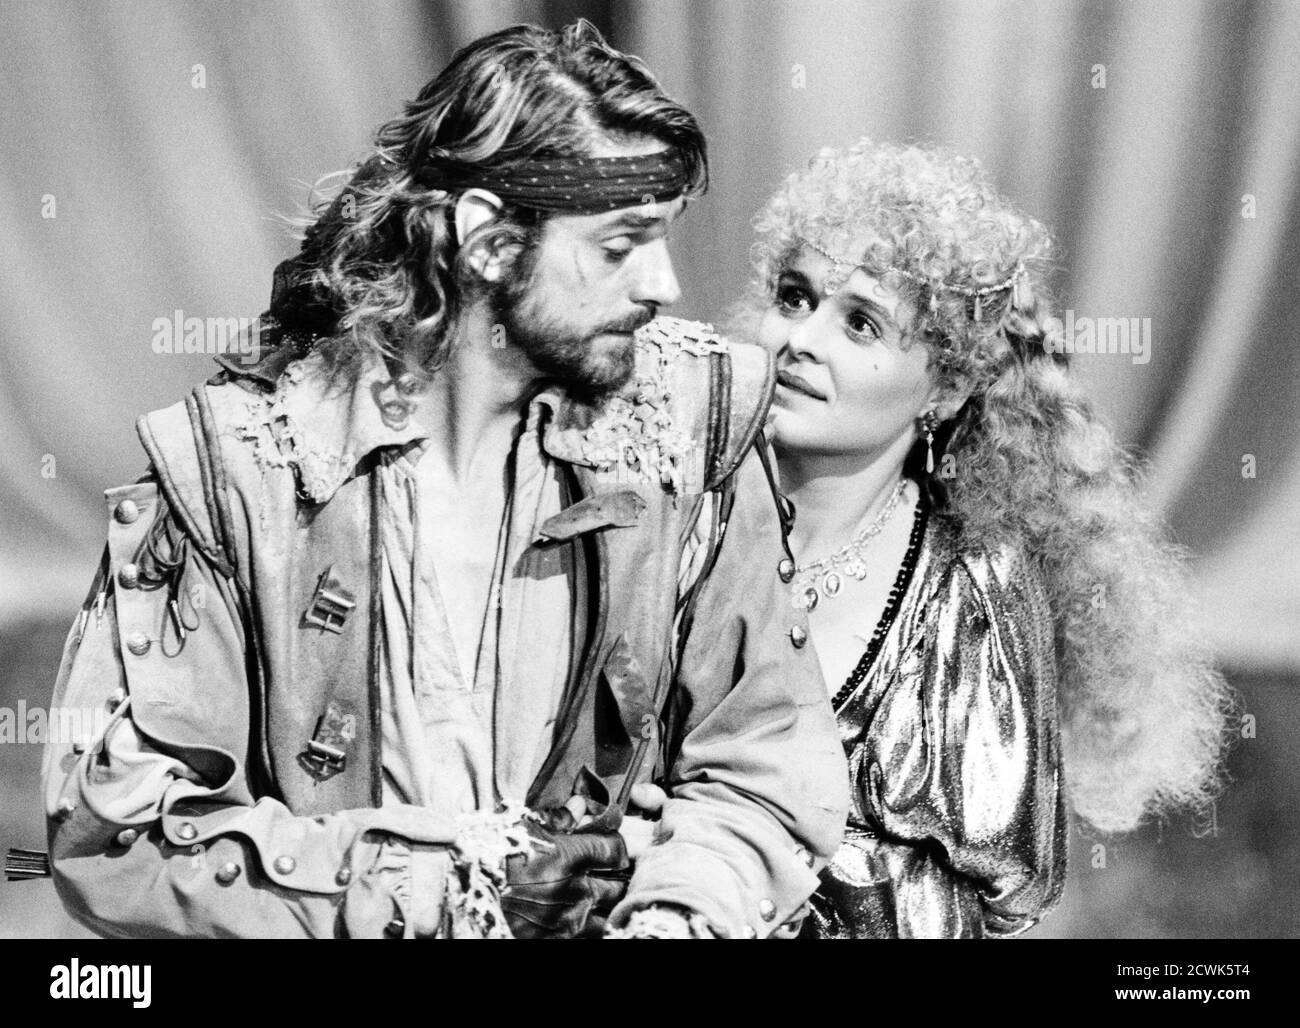 Jeremy Irons (Willmore, The Rover), Sinead Cusack (Angellica Bianca) im ROVER von Aphra Behn bei der Royal Shakespeare Company (RSC), Swan Theatre, Stratford-upon-Avon, England 03/07/1986 Adapted & Directed by John Barton Design: Louise Belson Beleuchtung: Wayne Dowdeswell Stockfoto